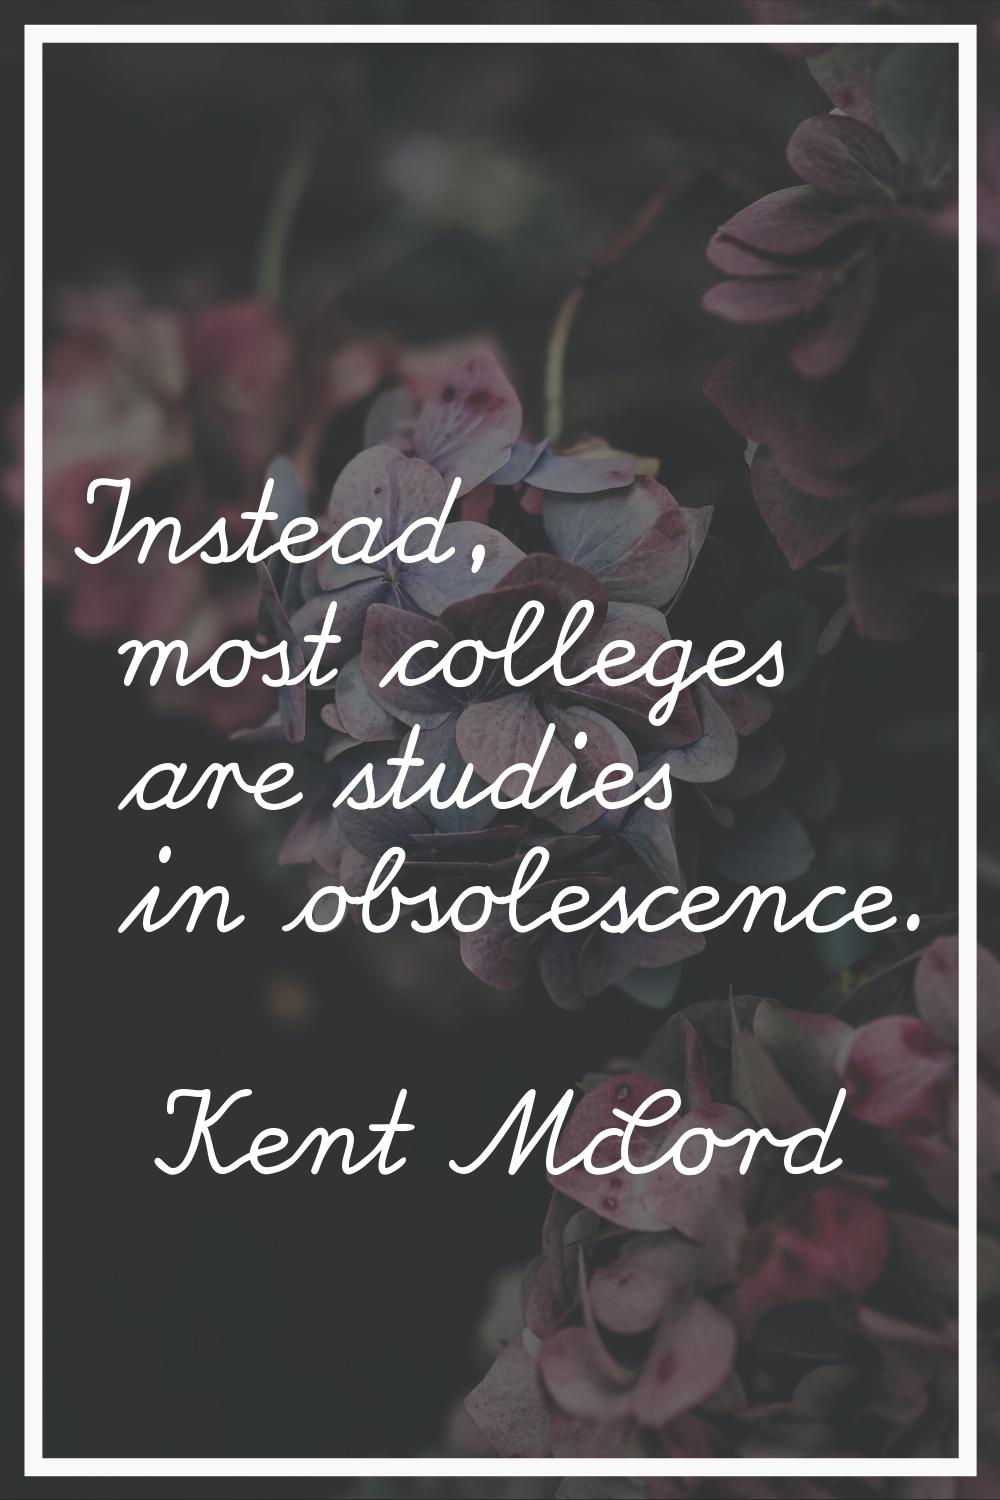 Instead, most colleges are studies in obsolescence.